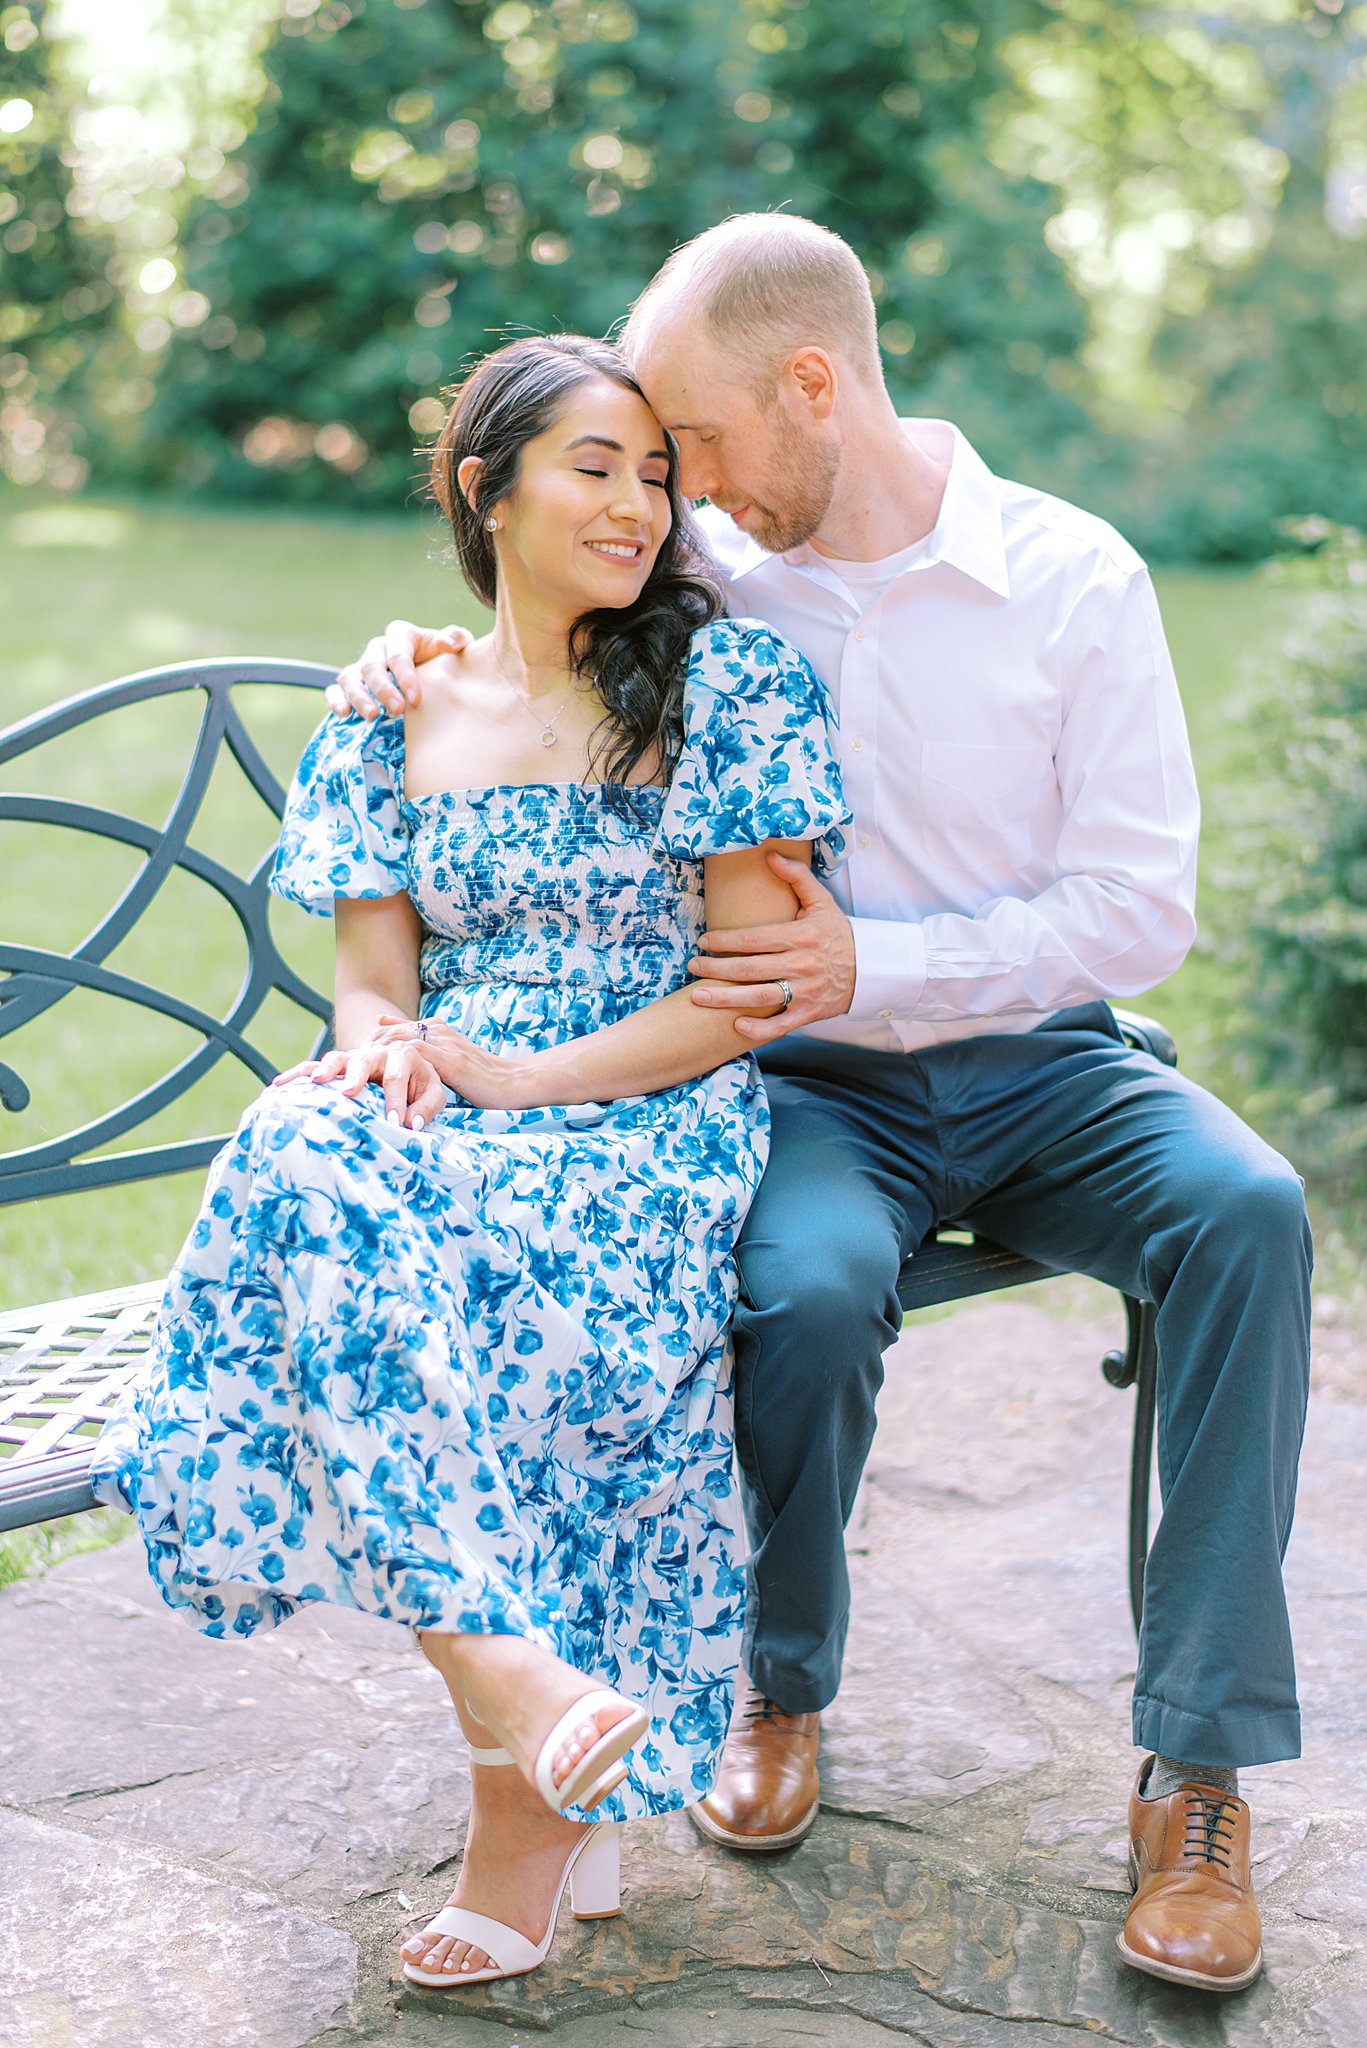 A bride sits on a bench leaning into her husband in a garden while wearing a blue floral dress